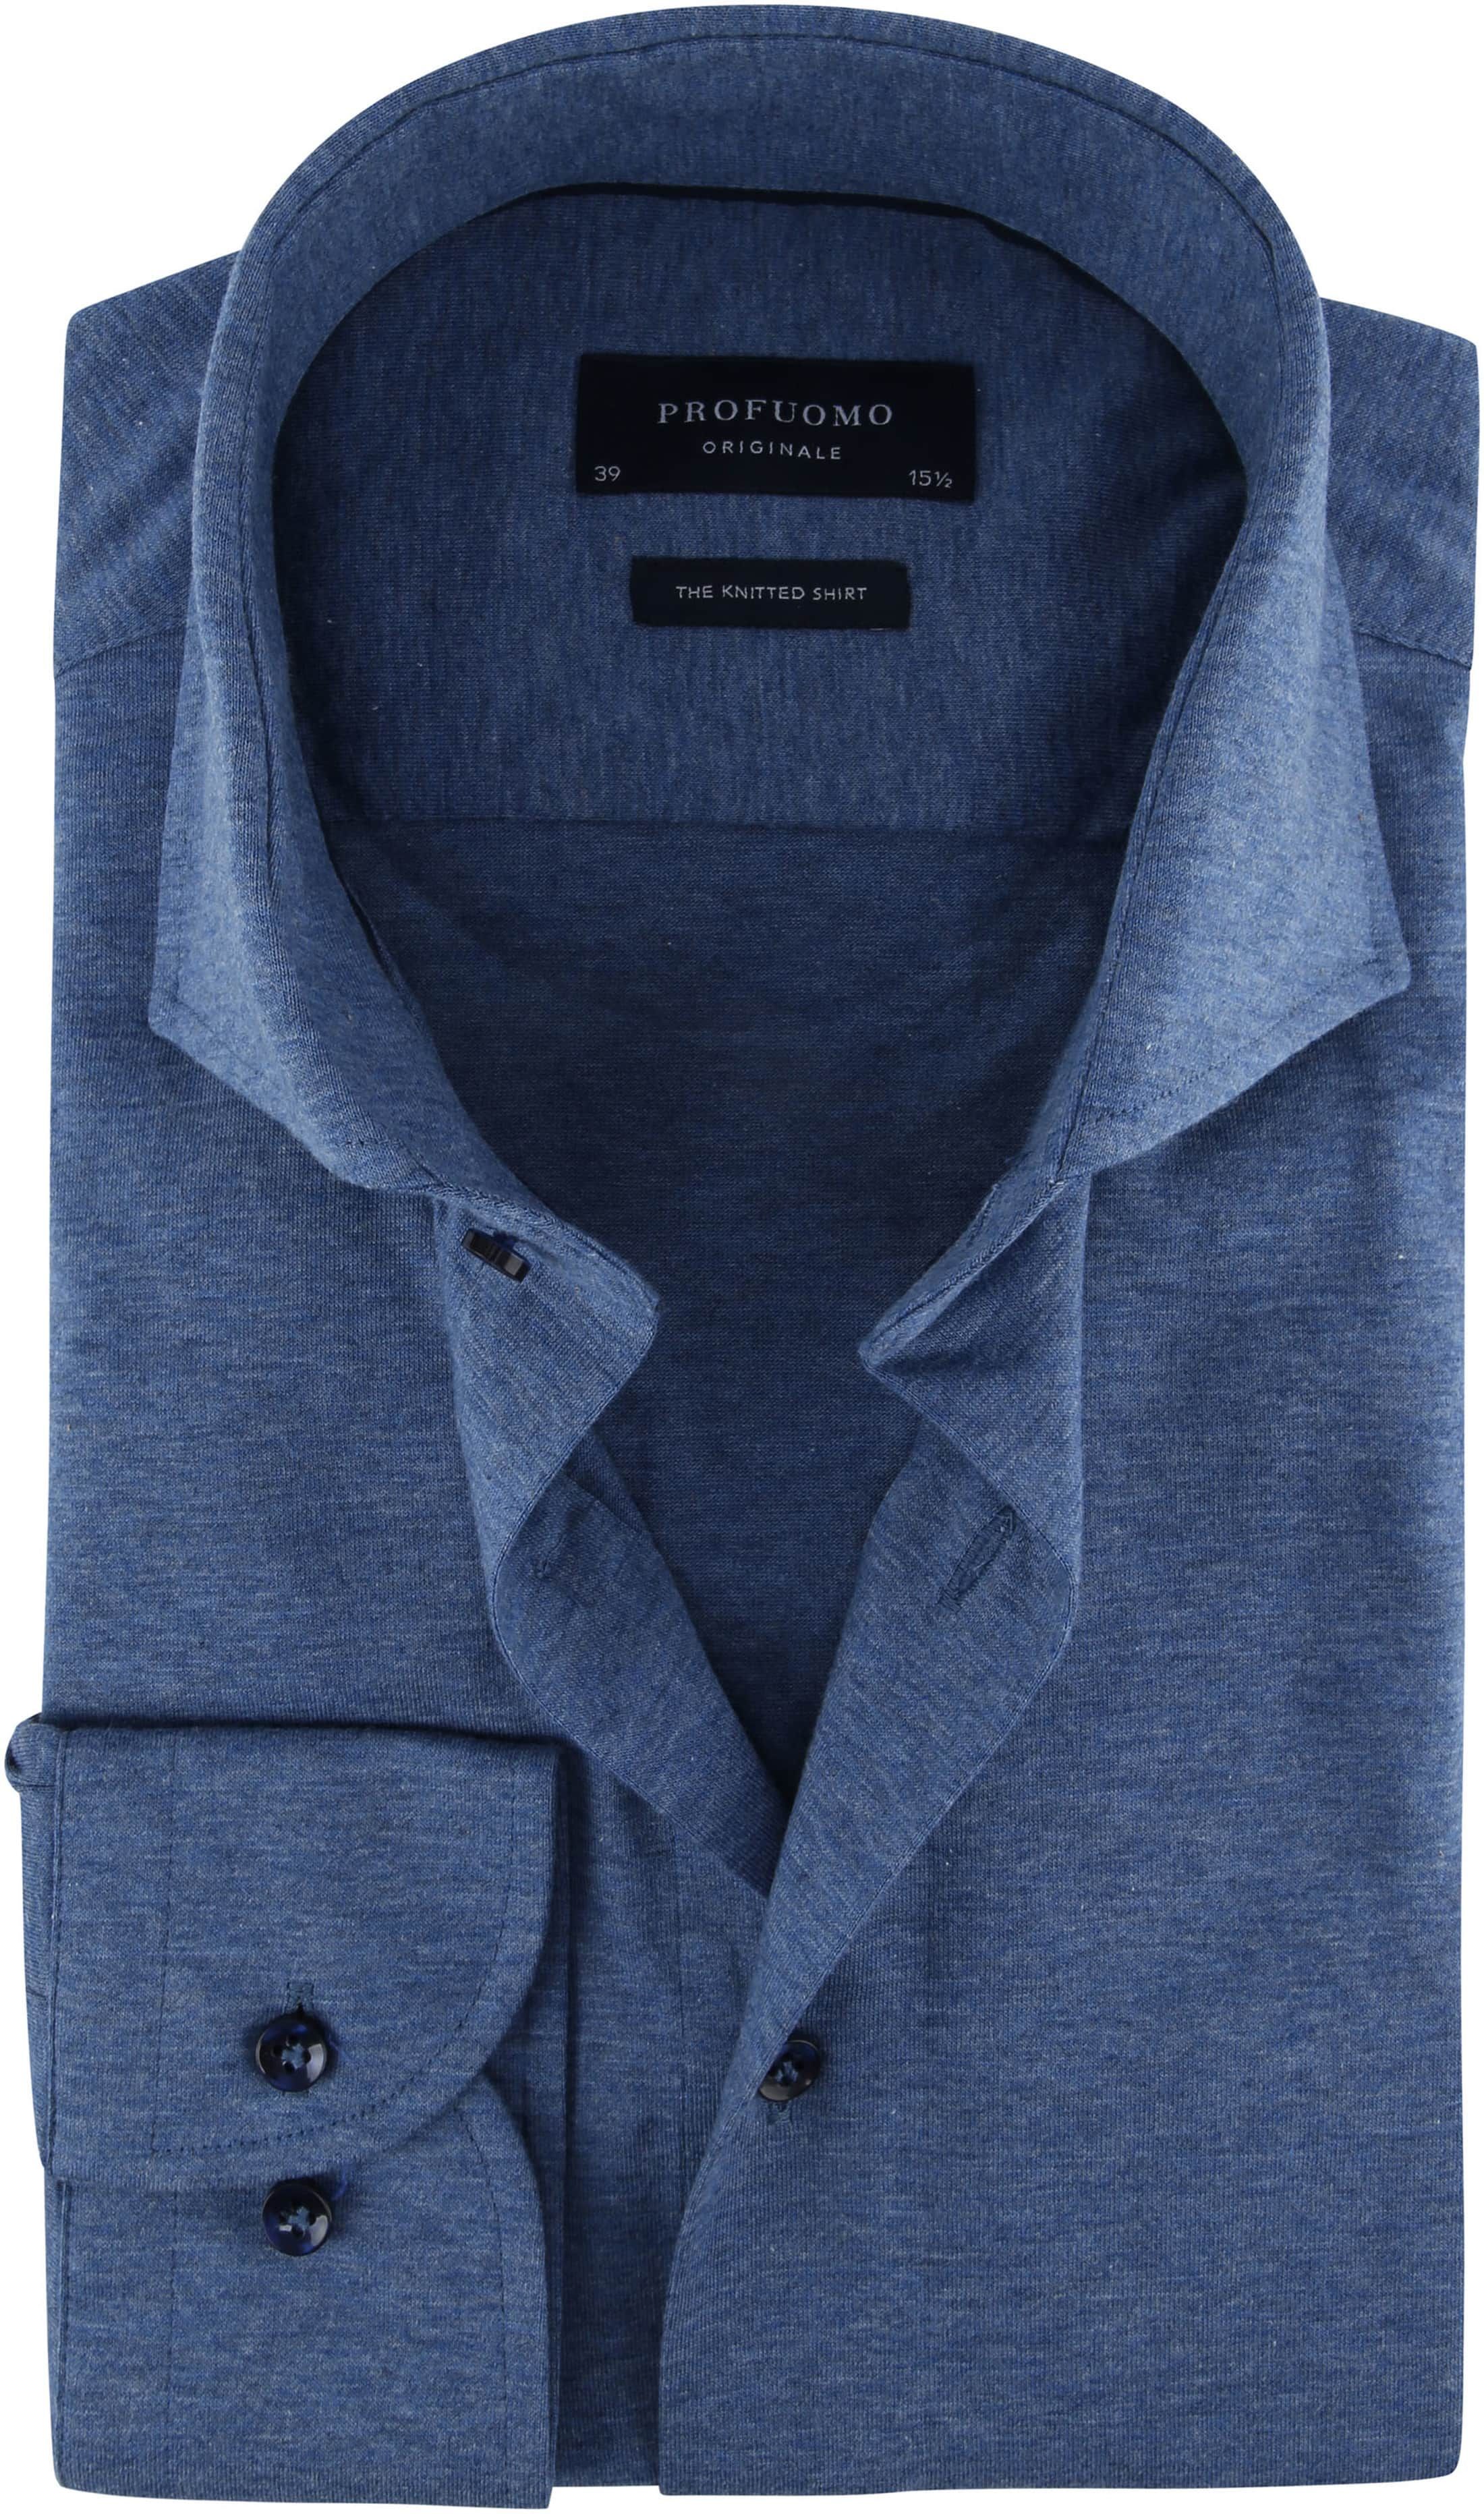 Profuomo Knitted Jersey Shirt Blue size 15